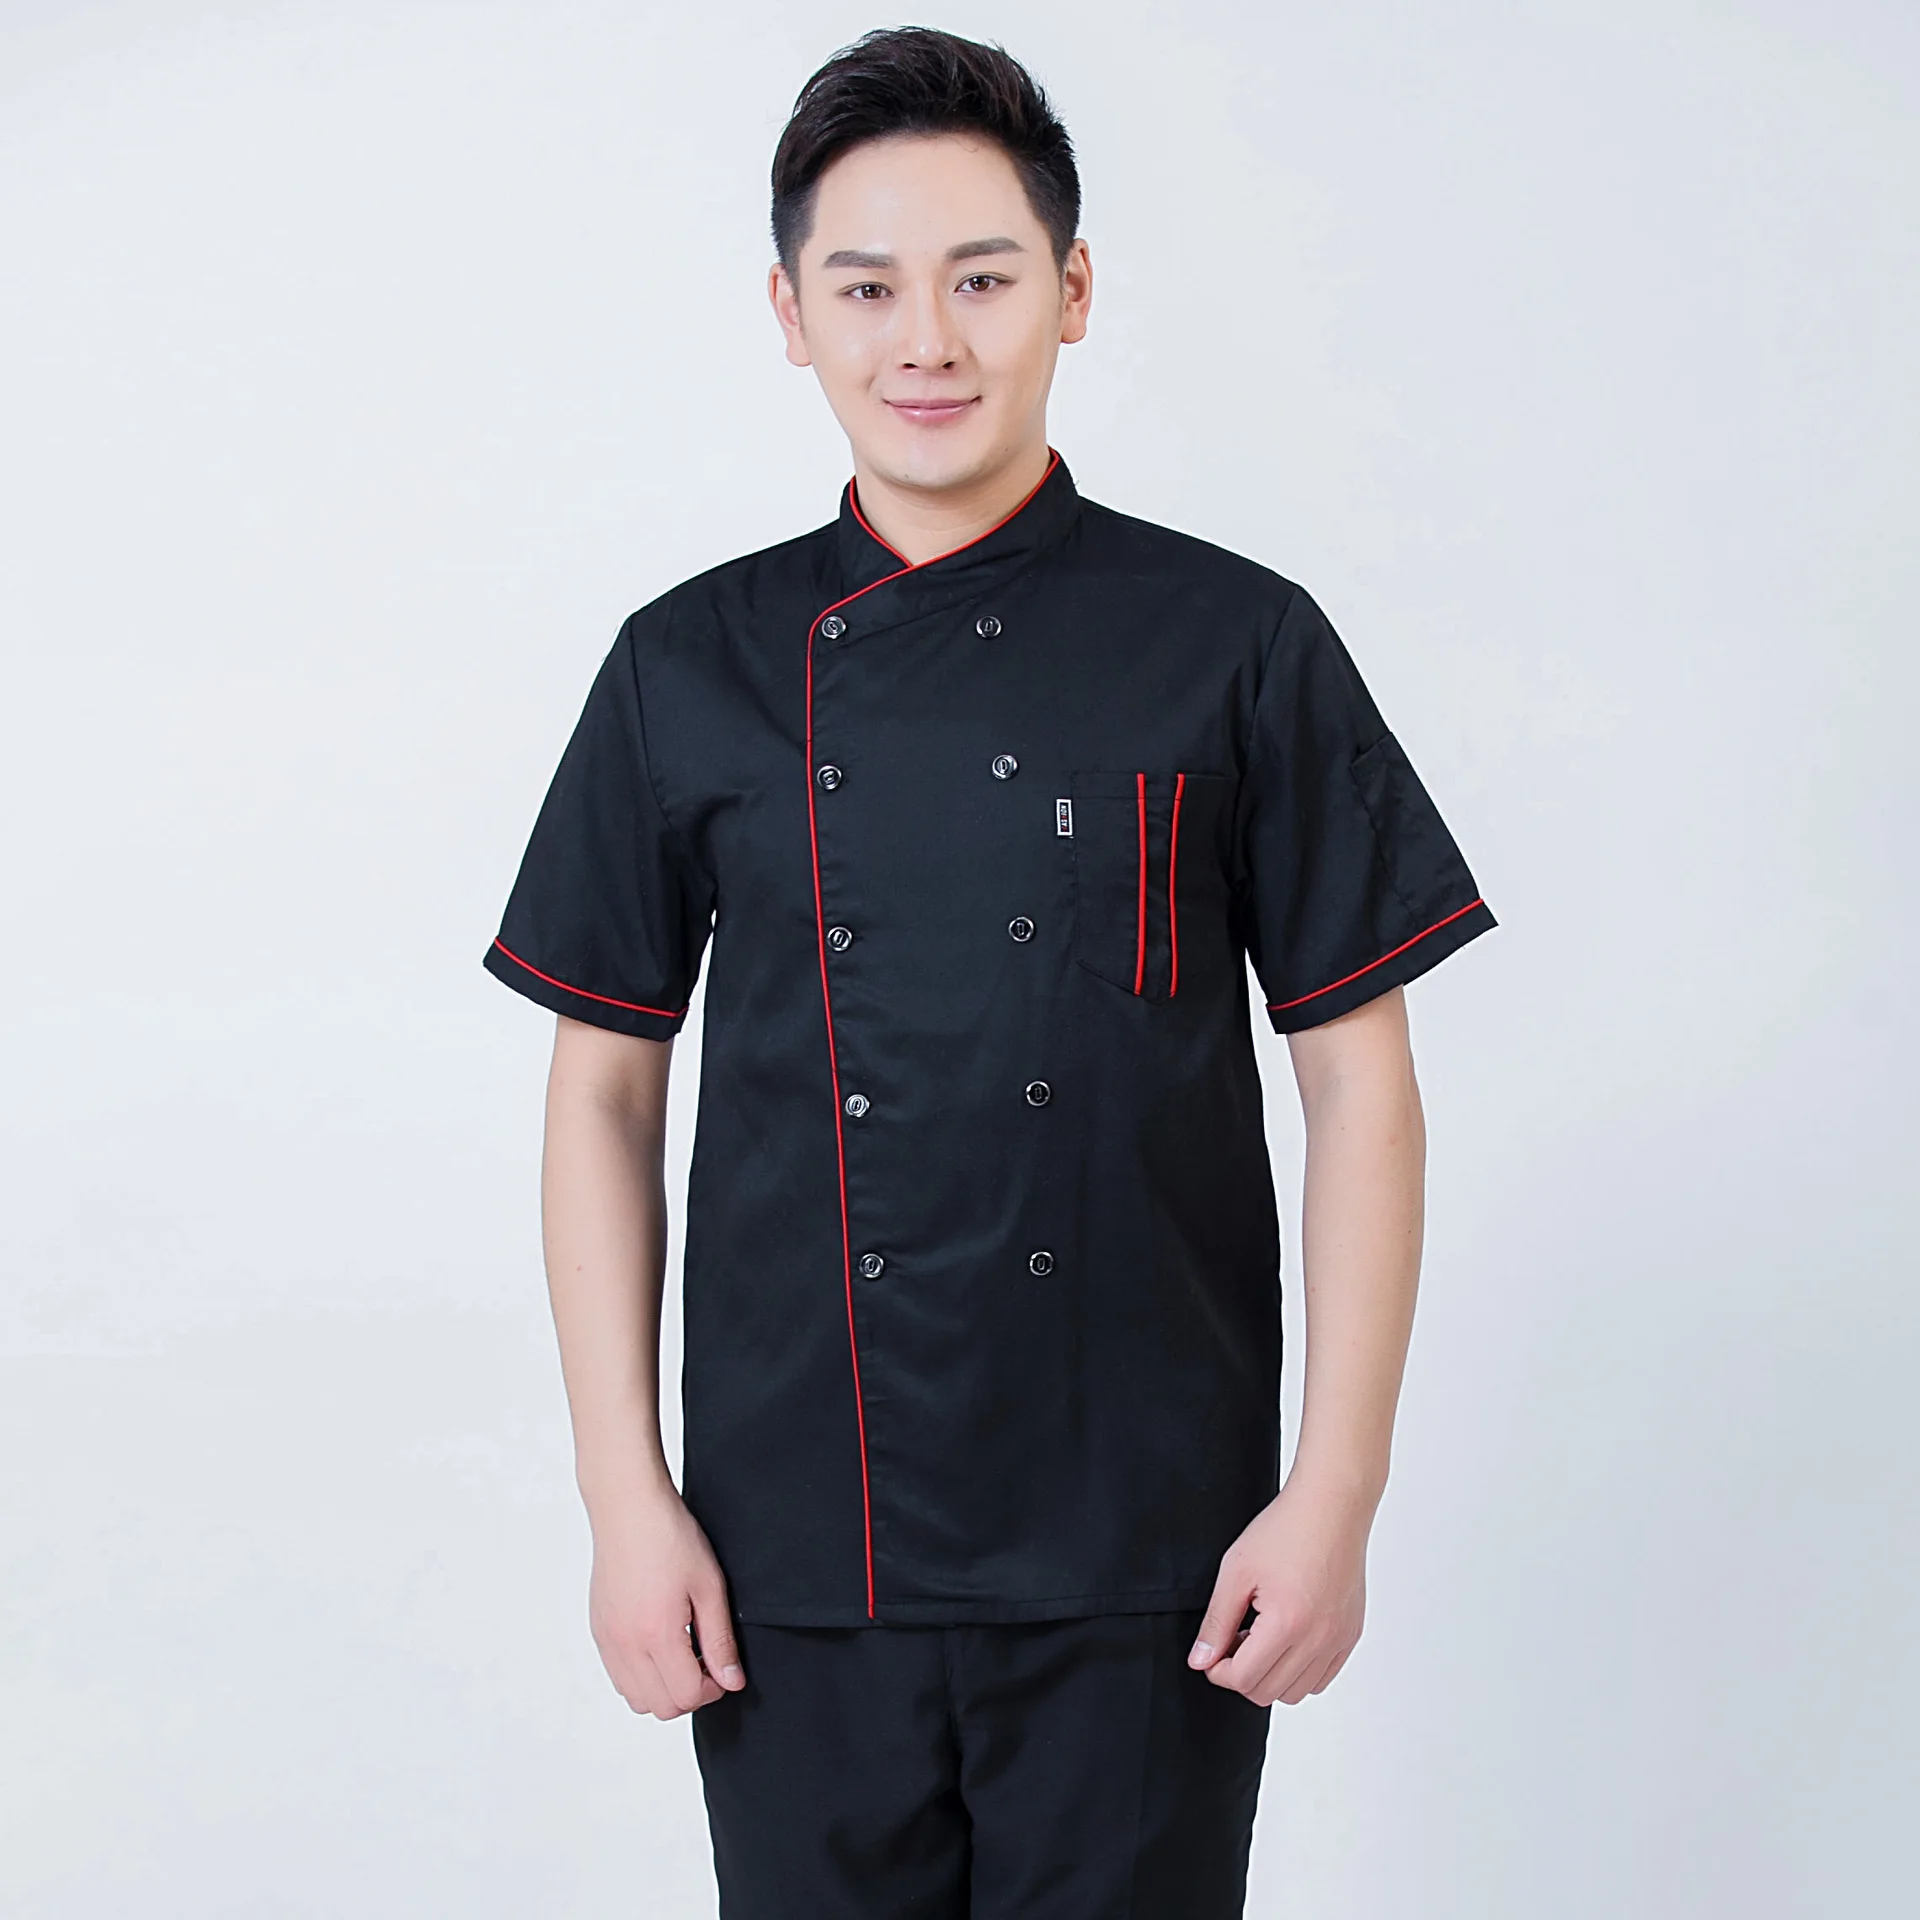 

New Unisex Kitchen hotel Chef Uniform Bakery Food Service Cook Short Sleeve shirt Breathable Double Breasted Chef Jacket clothes